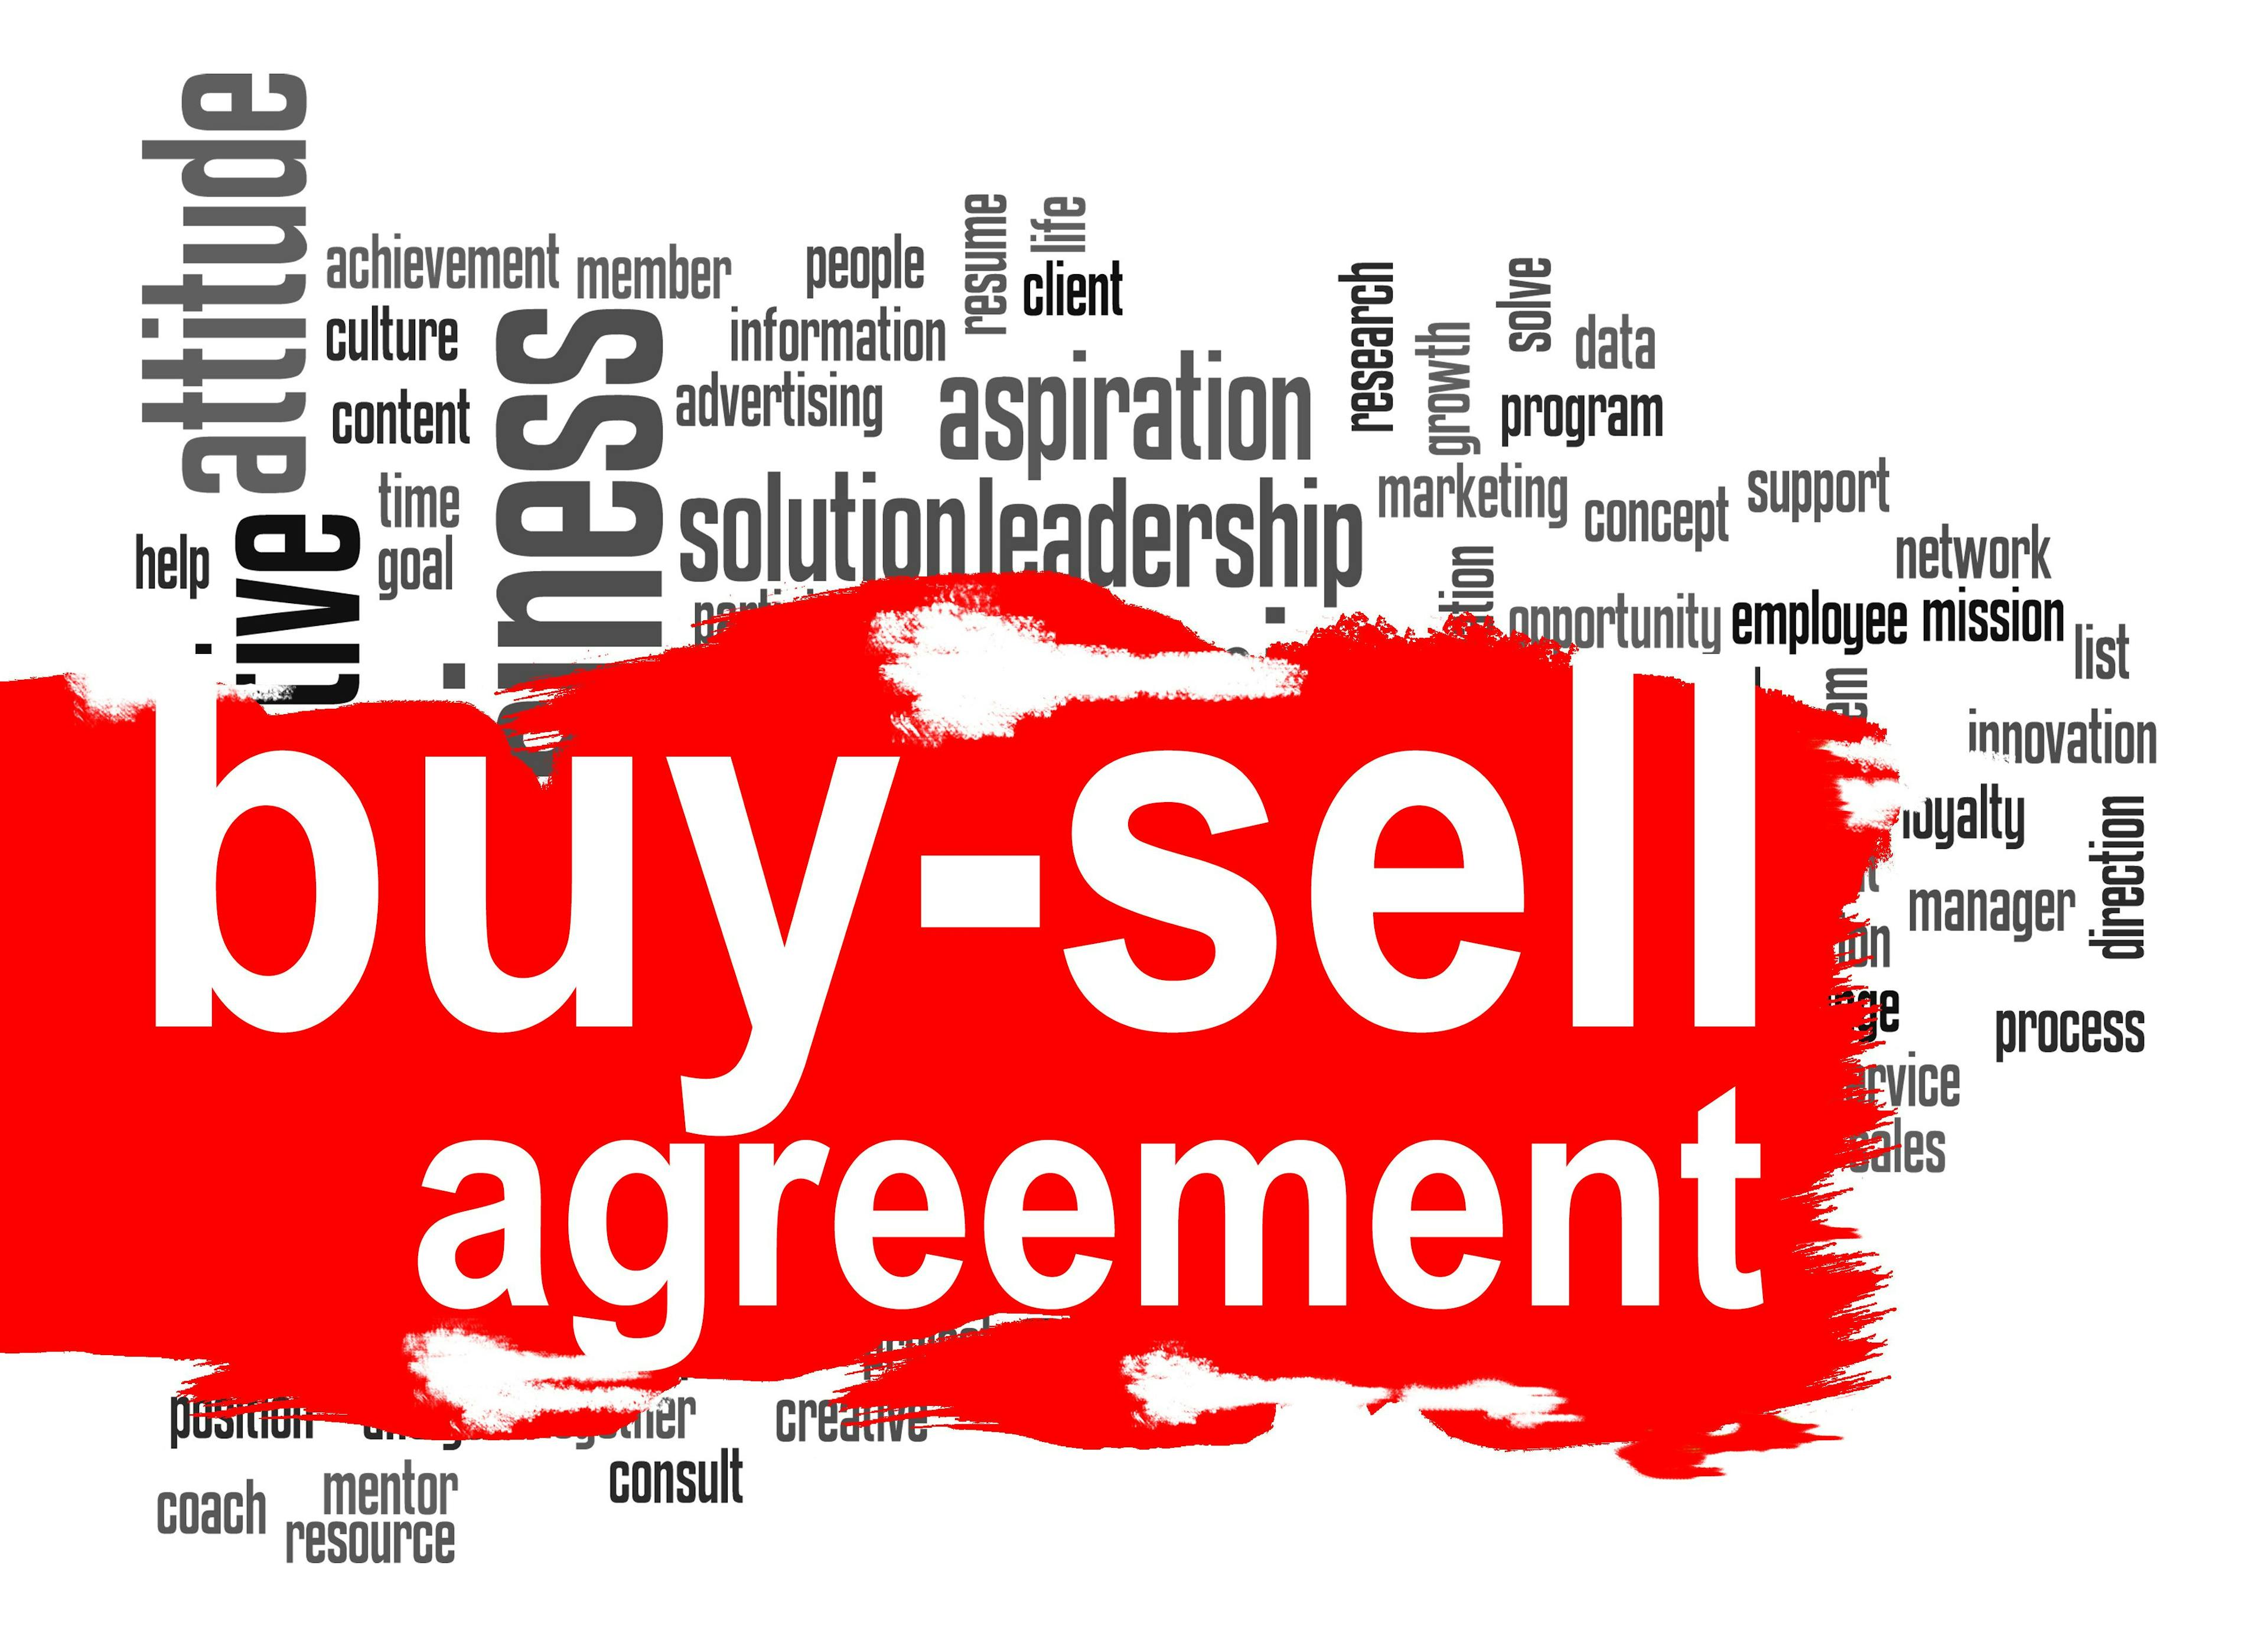 buy-sell agreement text